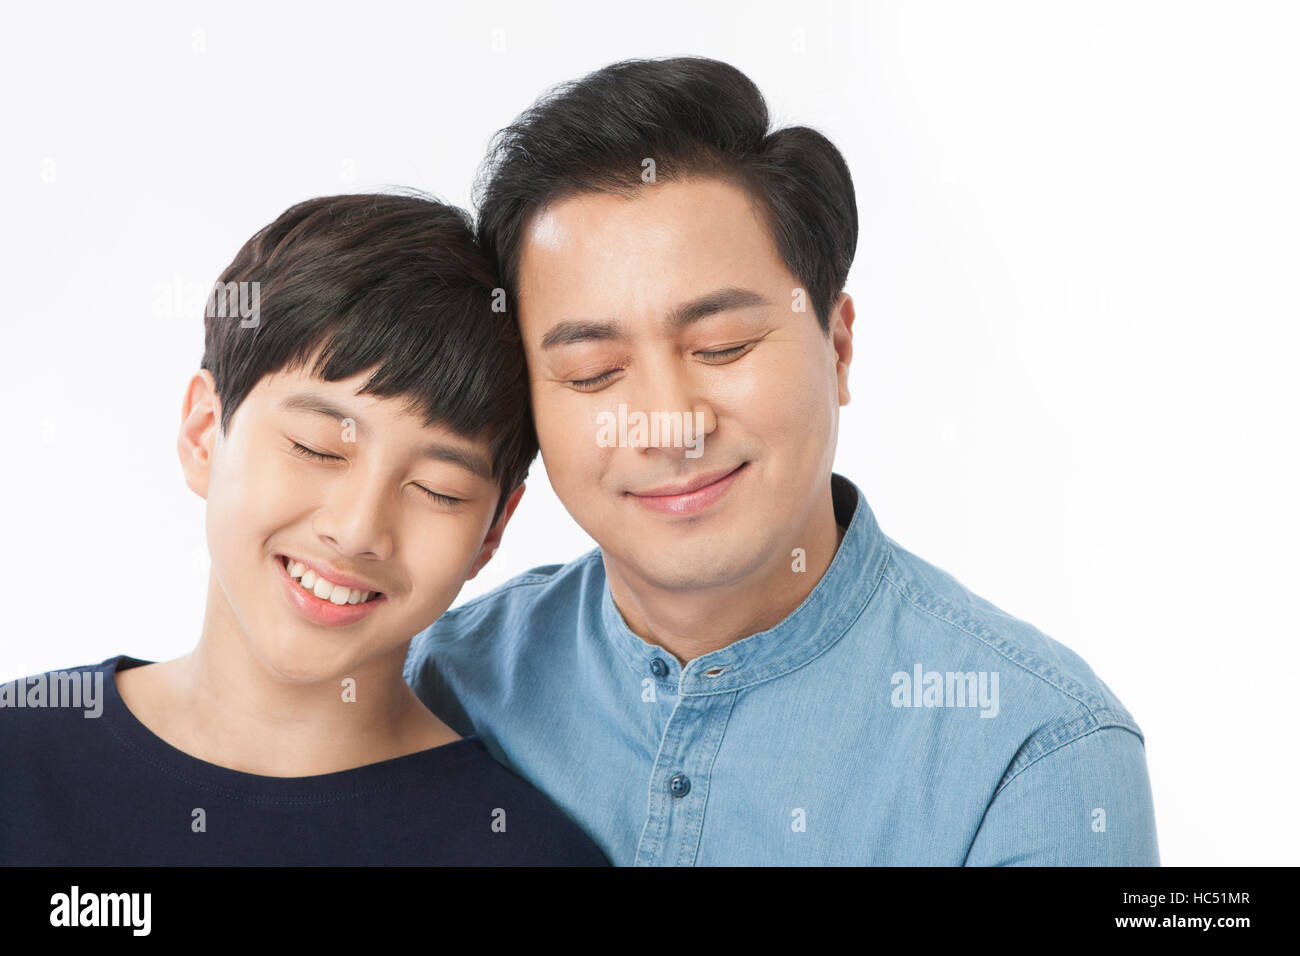 Portrait of smiling father and son face to face closing their eyes Stock Photo